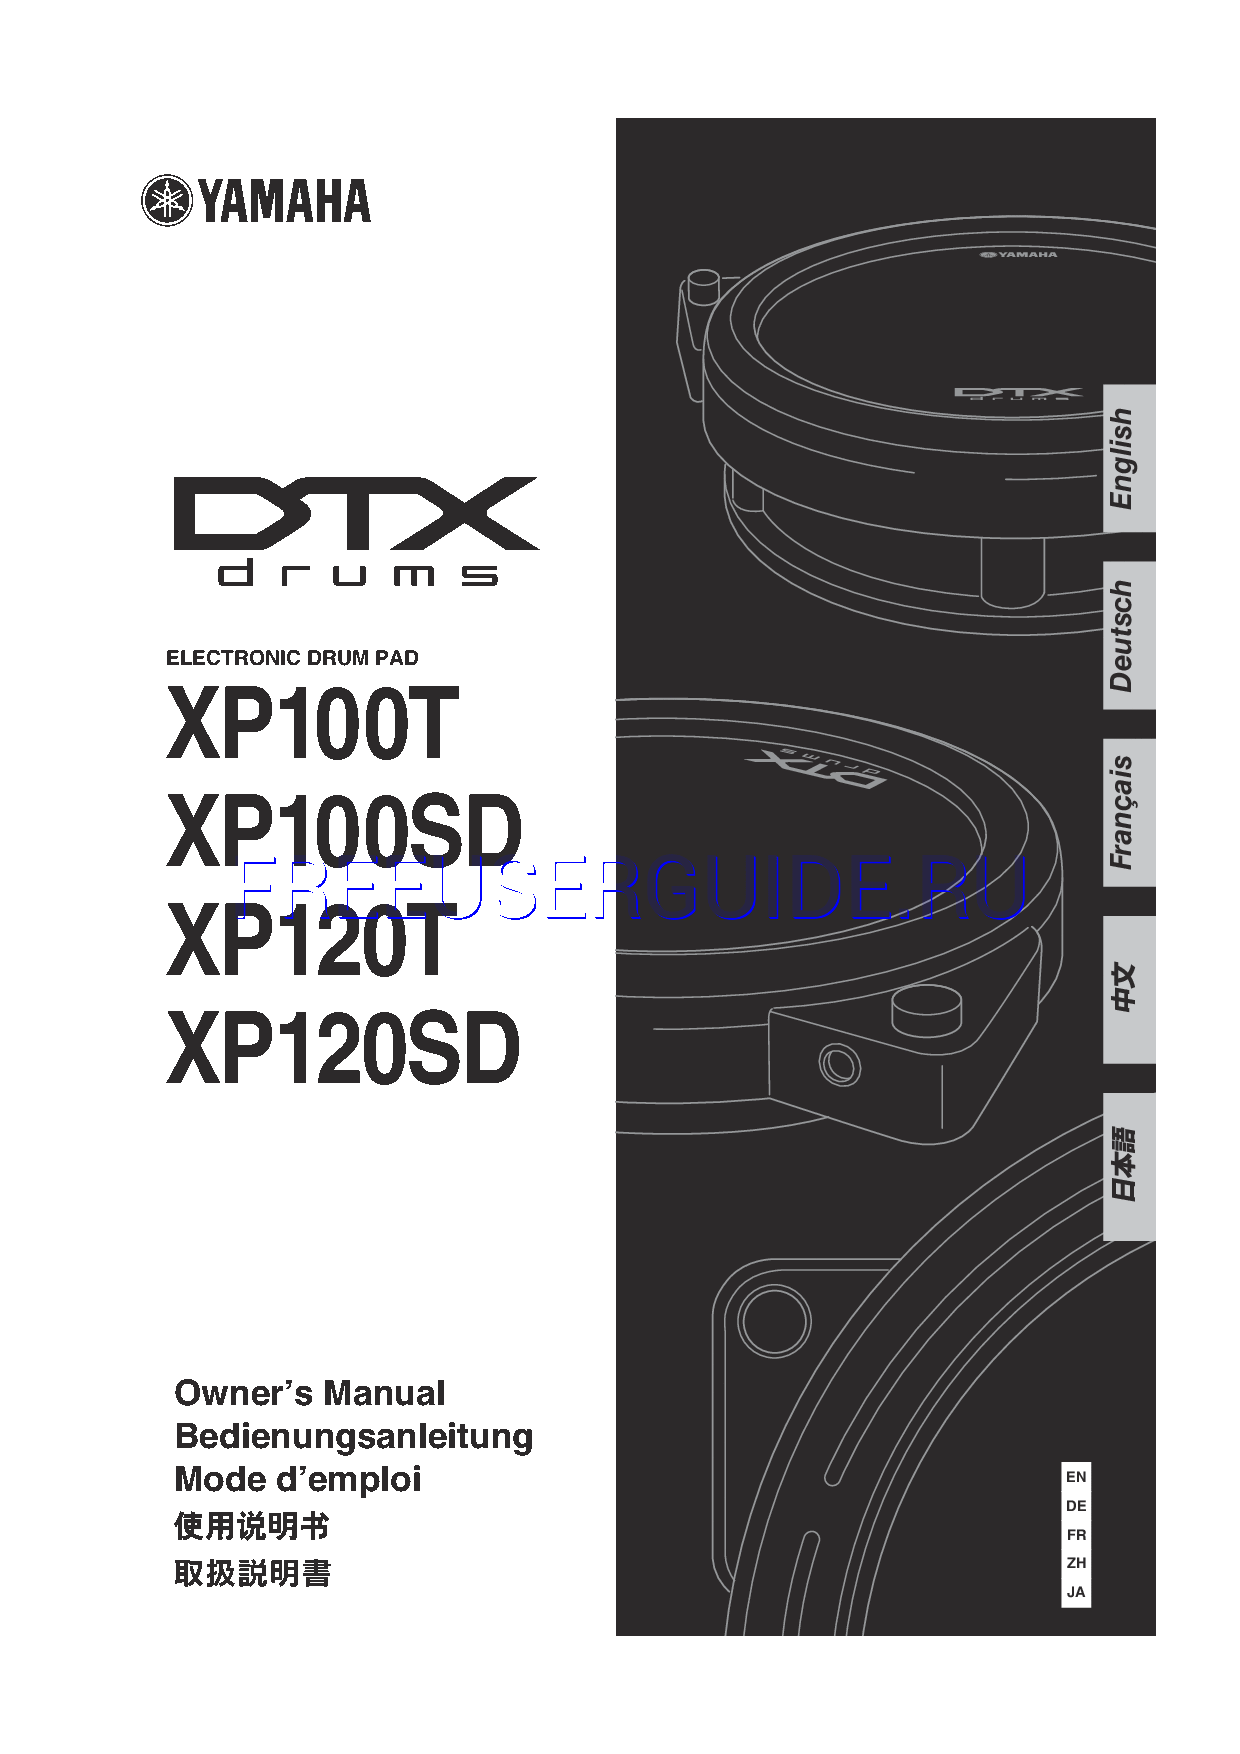 Read online User's Manual for Yamaha DTX XP100T (Page 1)